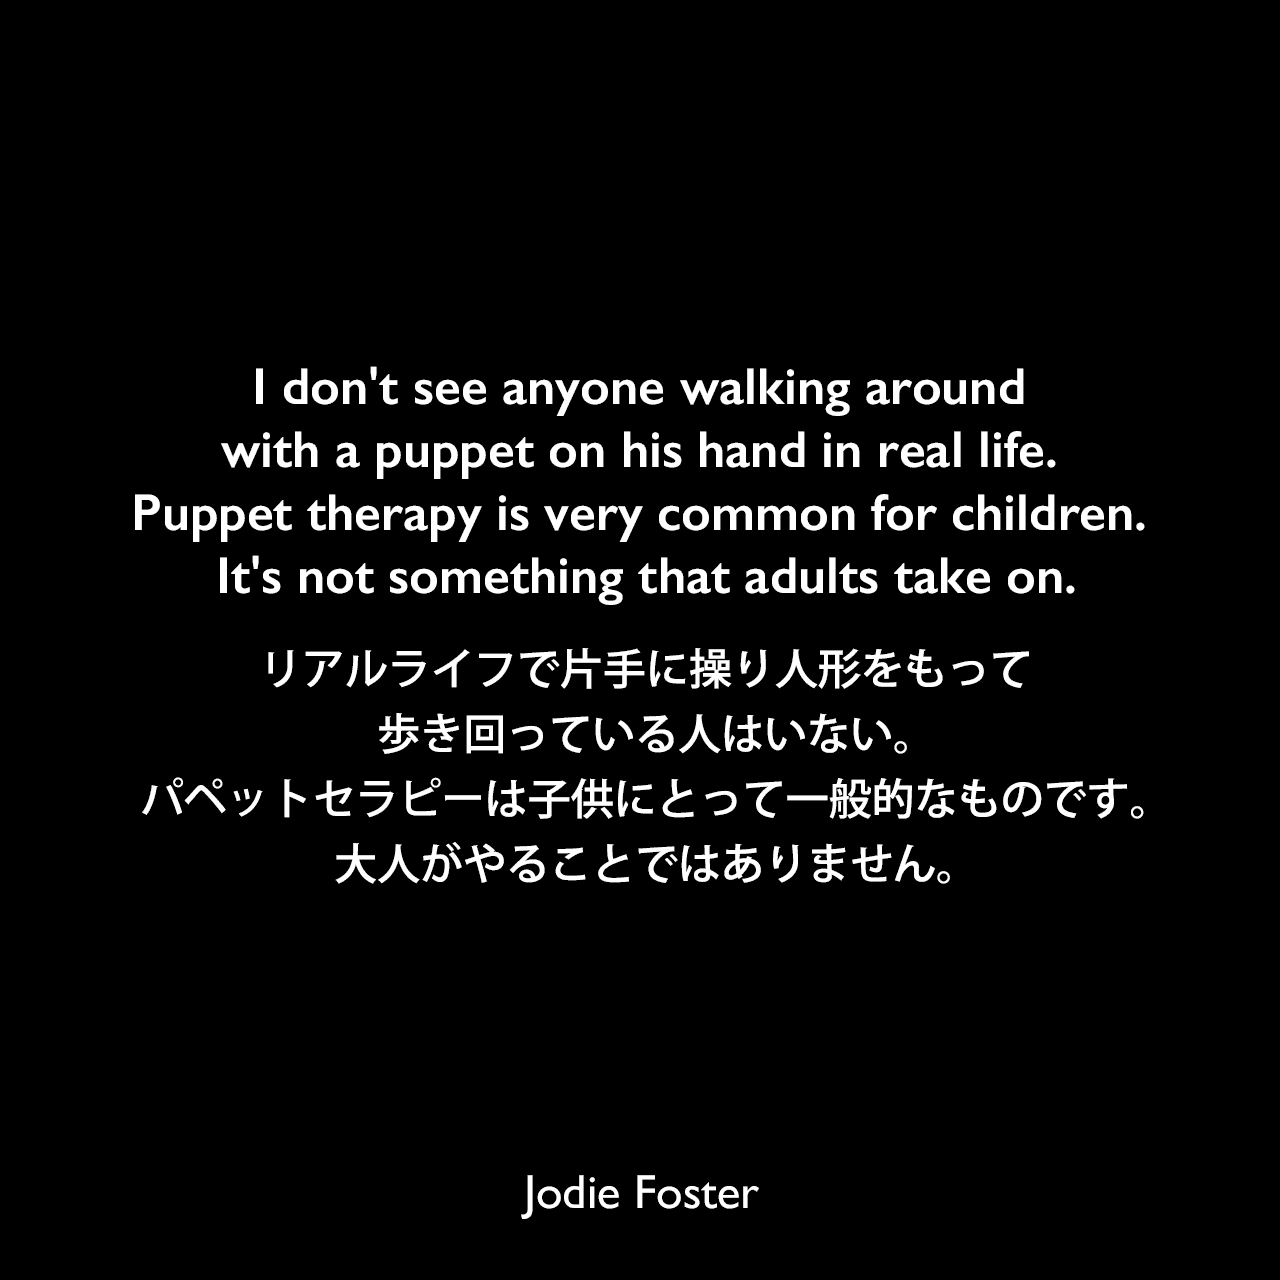 I don't see anyone walking around with a puppet on his hand in real life. Puppet therapy is very common for children. It's not something that adults take on.リアルライフで片手に操り人形をもって歩き回っている人はいない。パペットセラピーは子供にとって一般的なものです。大人がやることではありません。Jodie Foster